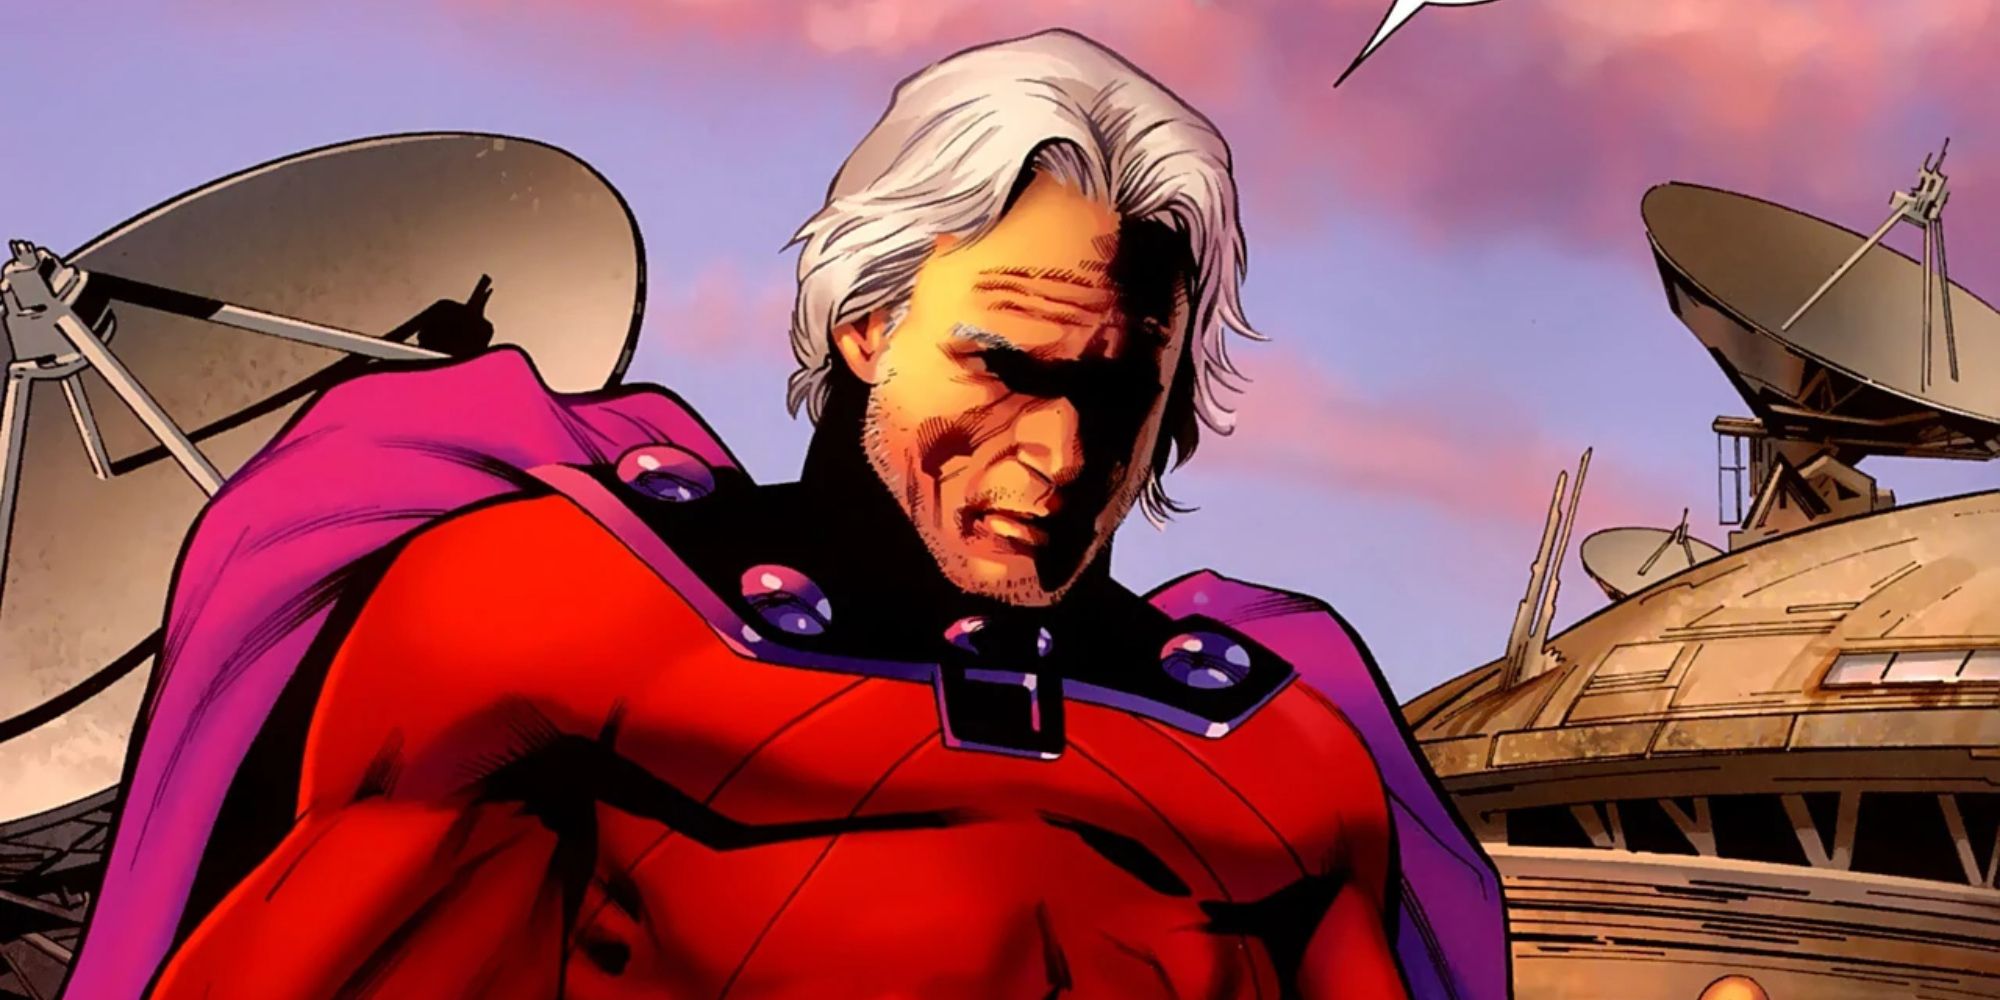 An older Magneto sitting in the comics